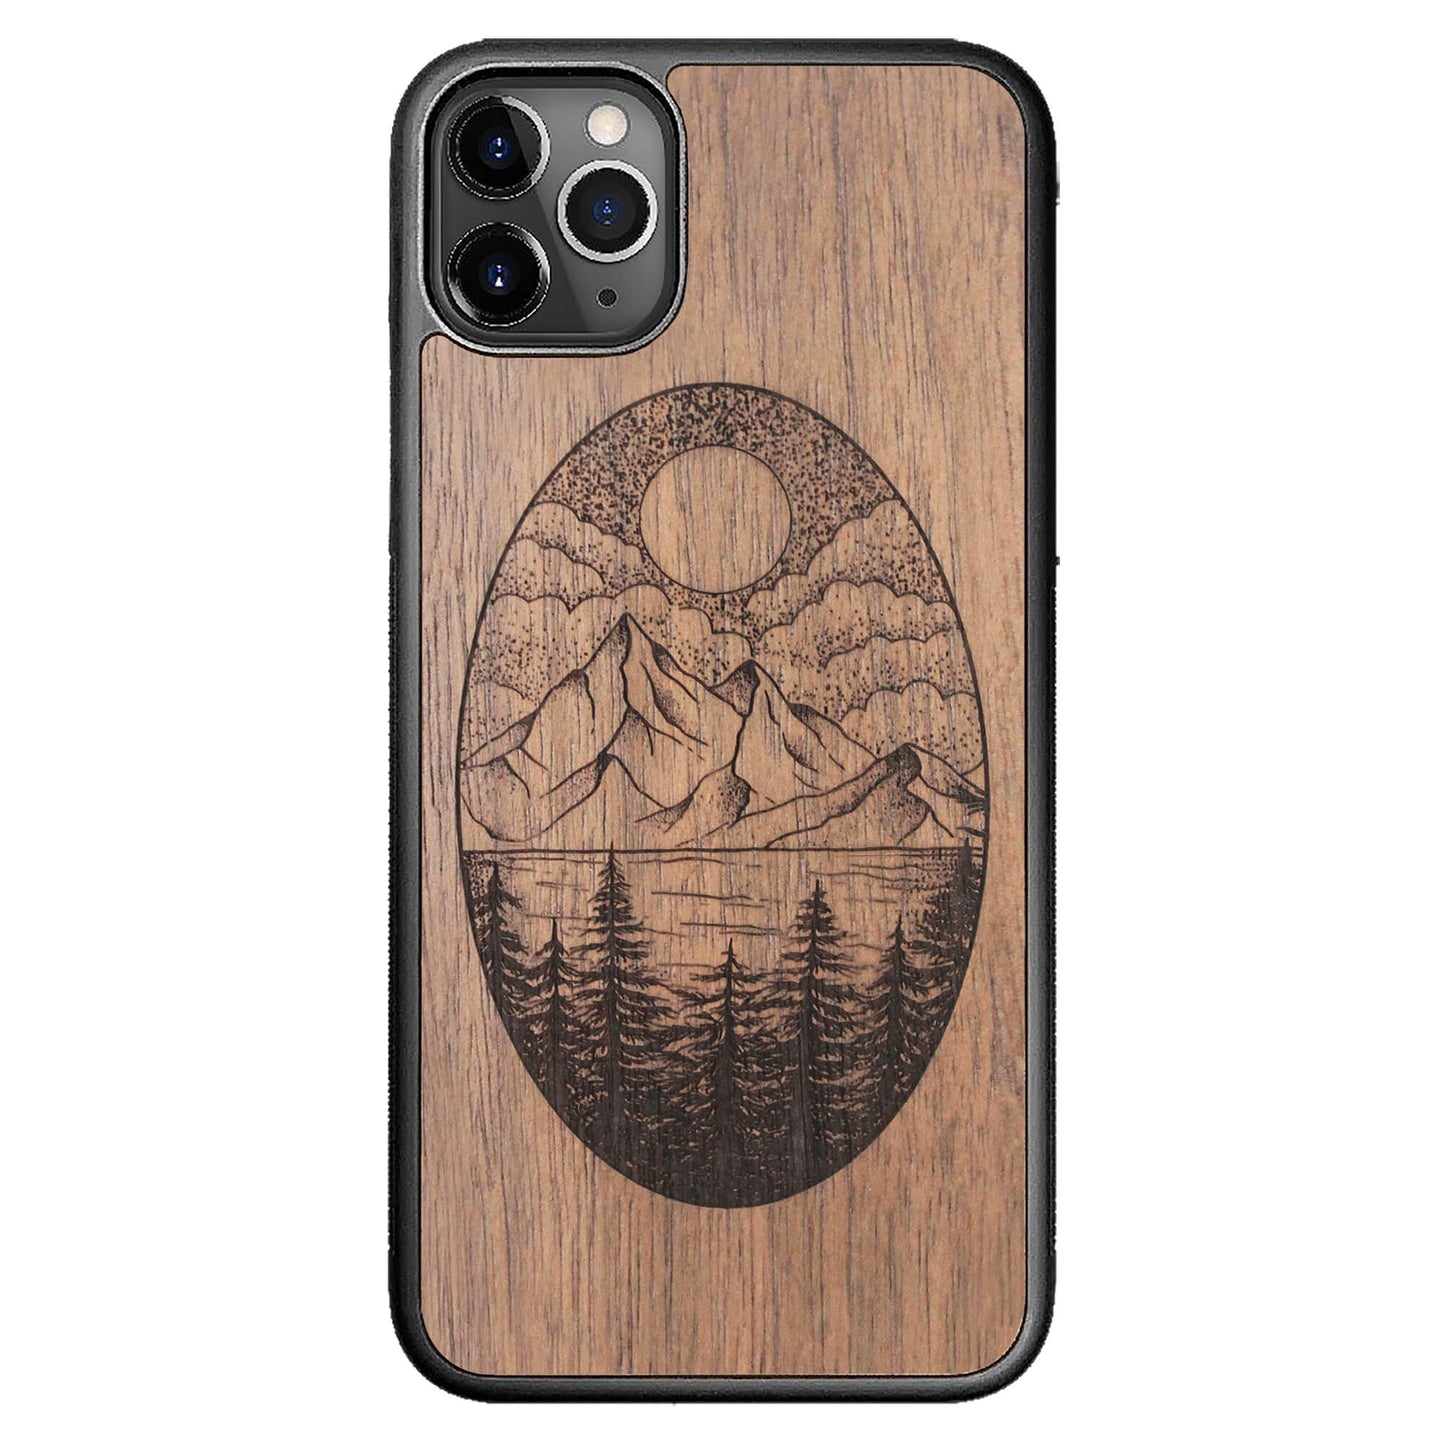 Wooden Case for iPhone 11 Pro Max Landscape